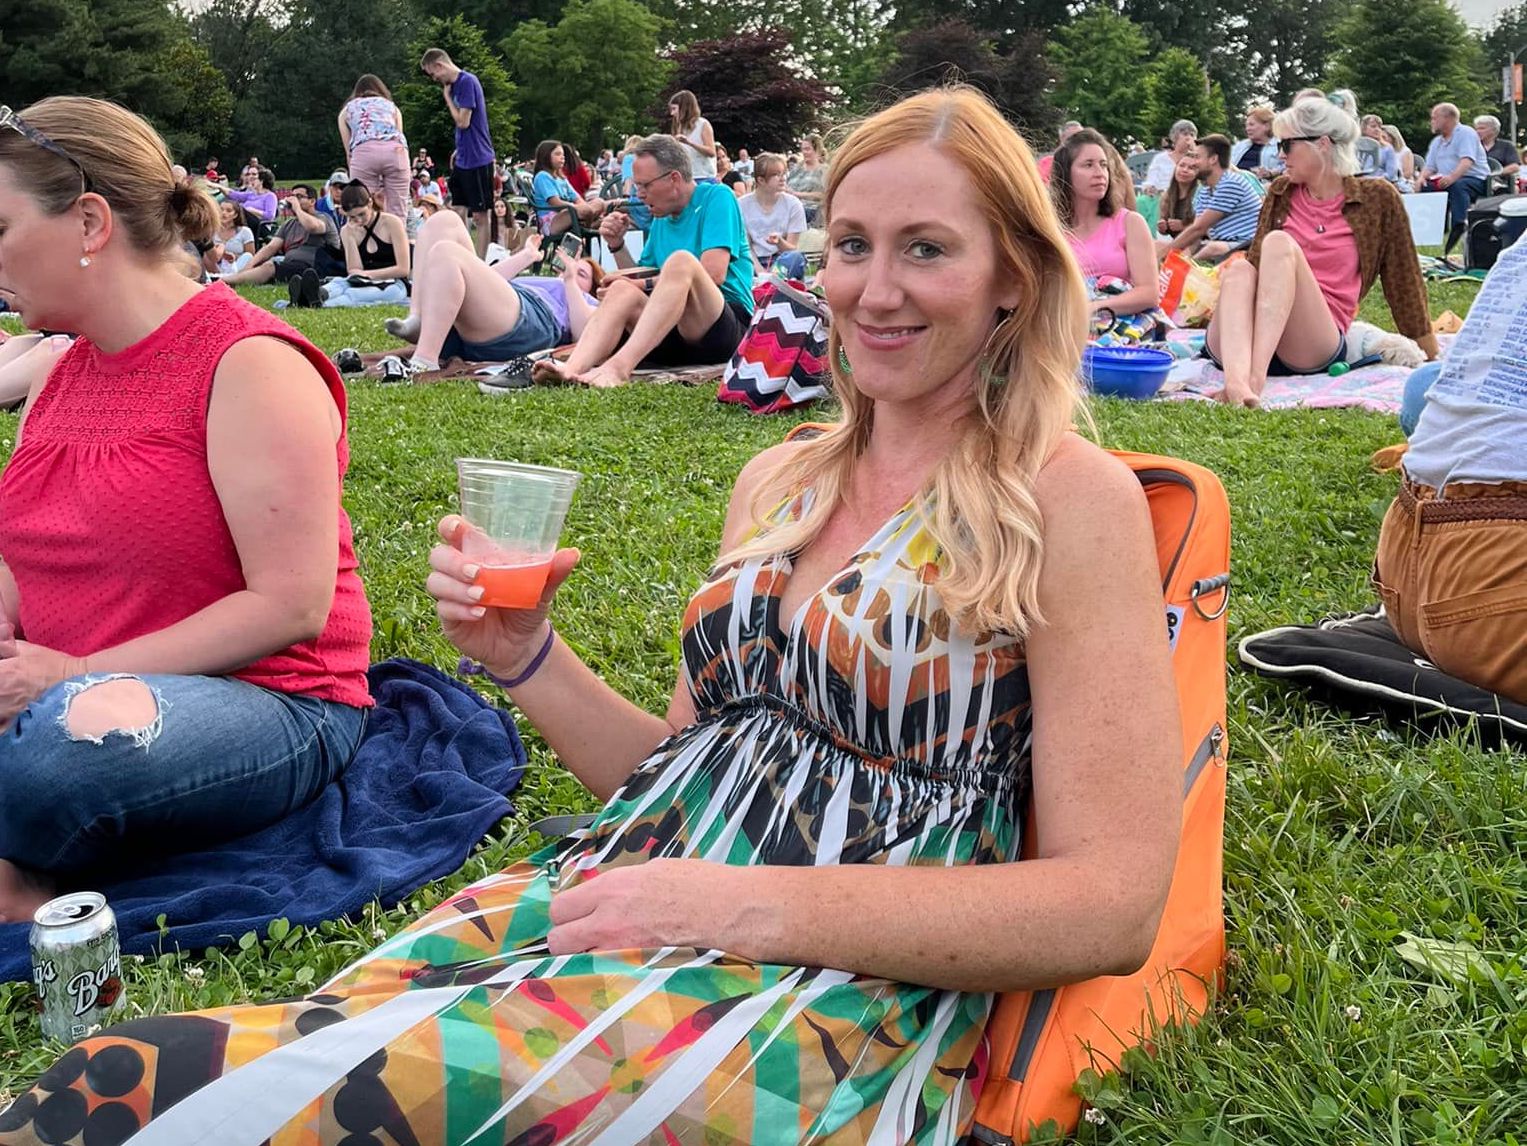 A woman enjoys a drink using her Playamigo ground chair on the grass for Shakespeare in the Park.